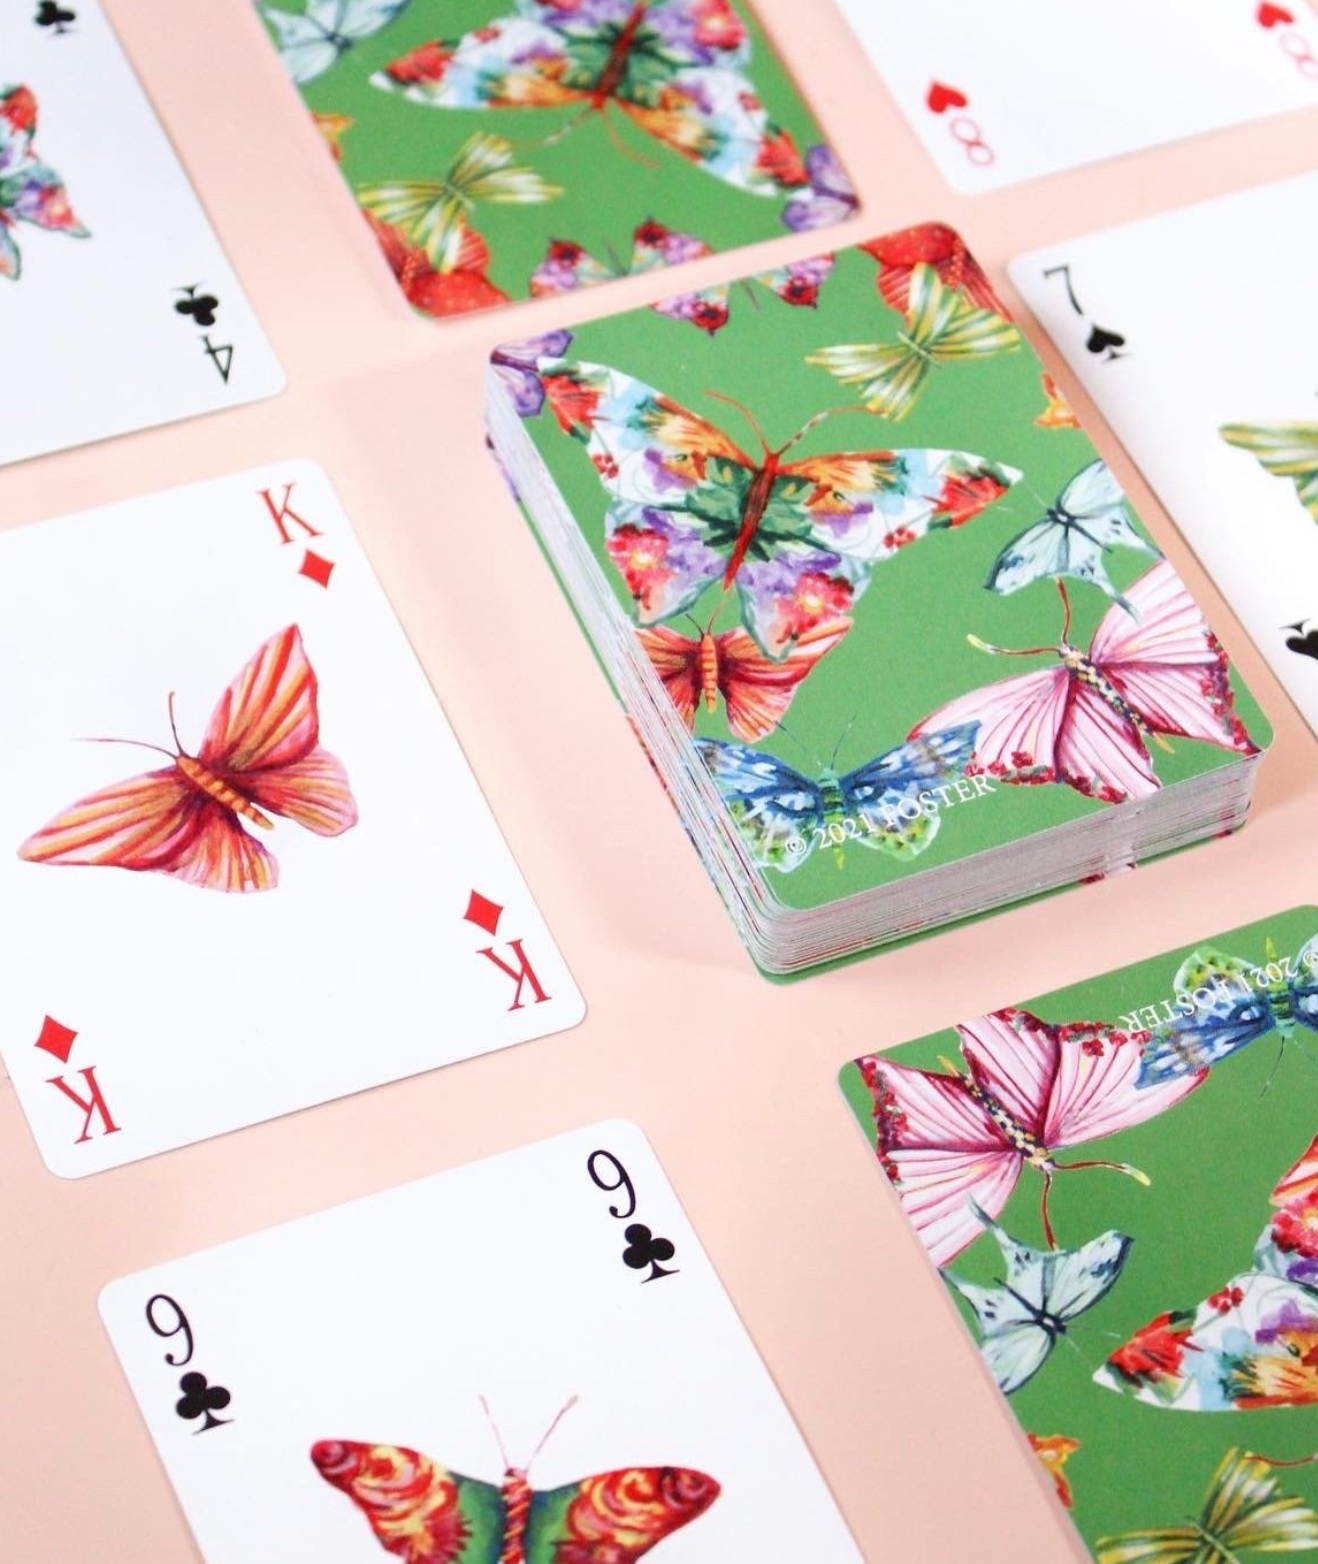 Butterfly playing cards by FOSTER